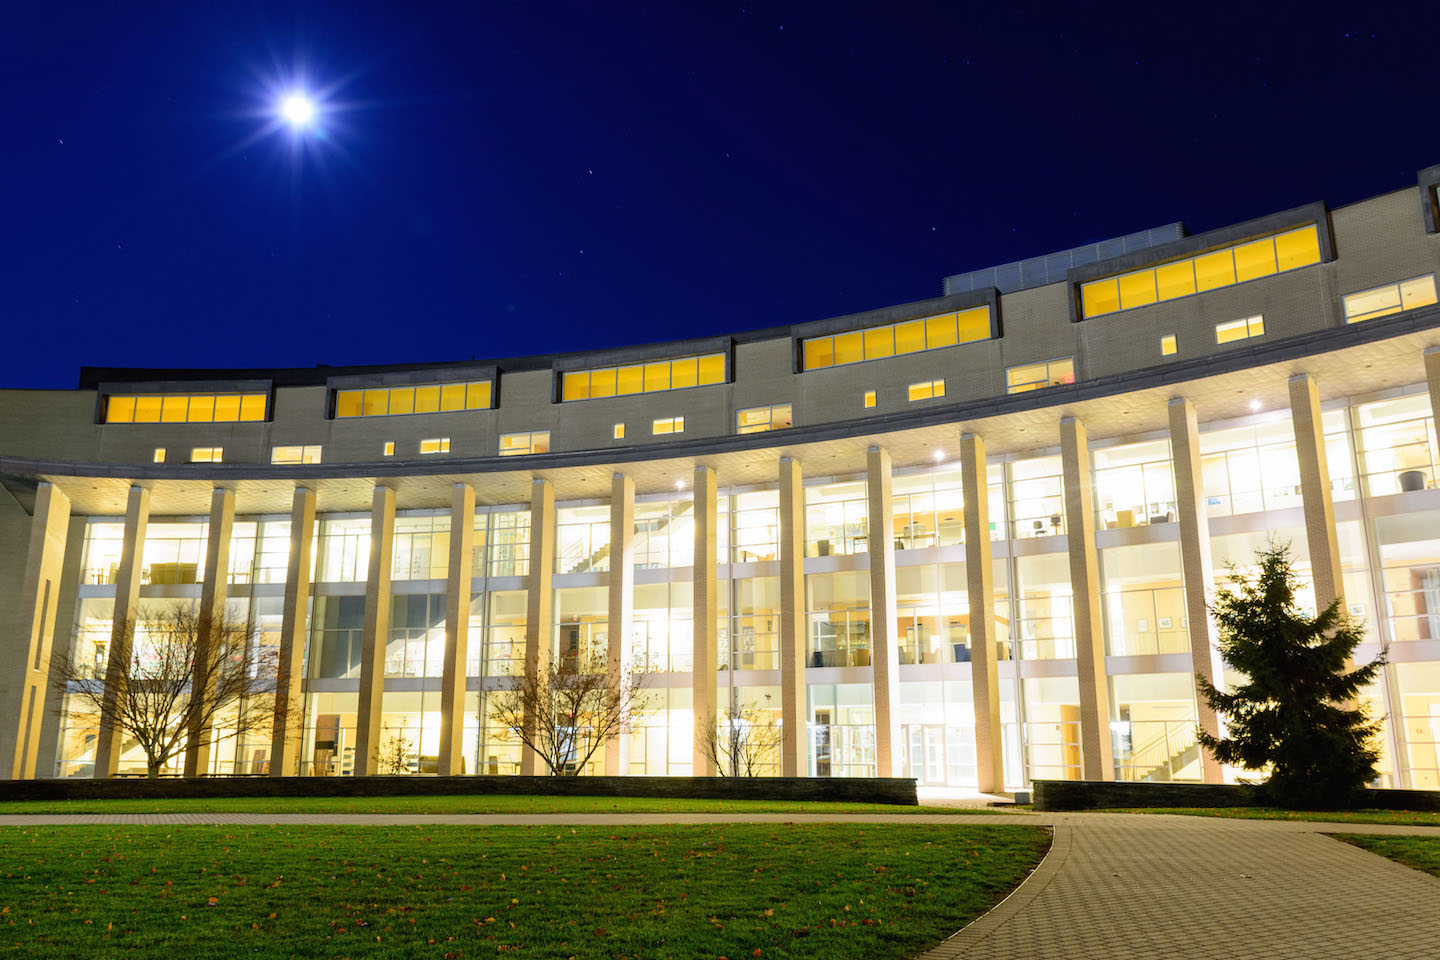 Olin College by night